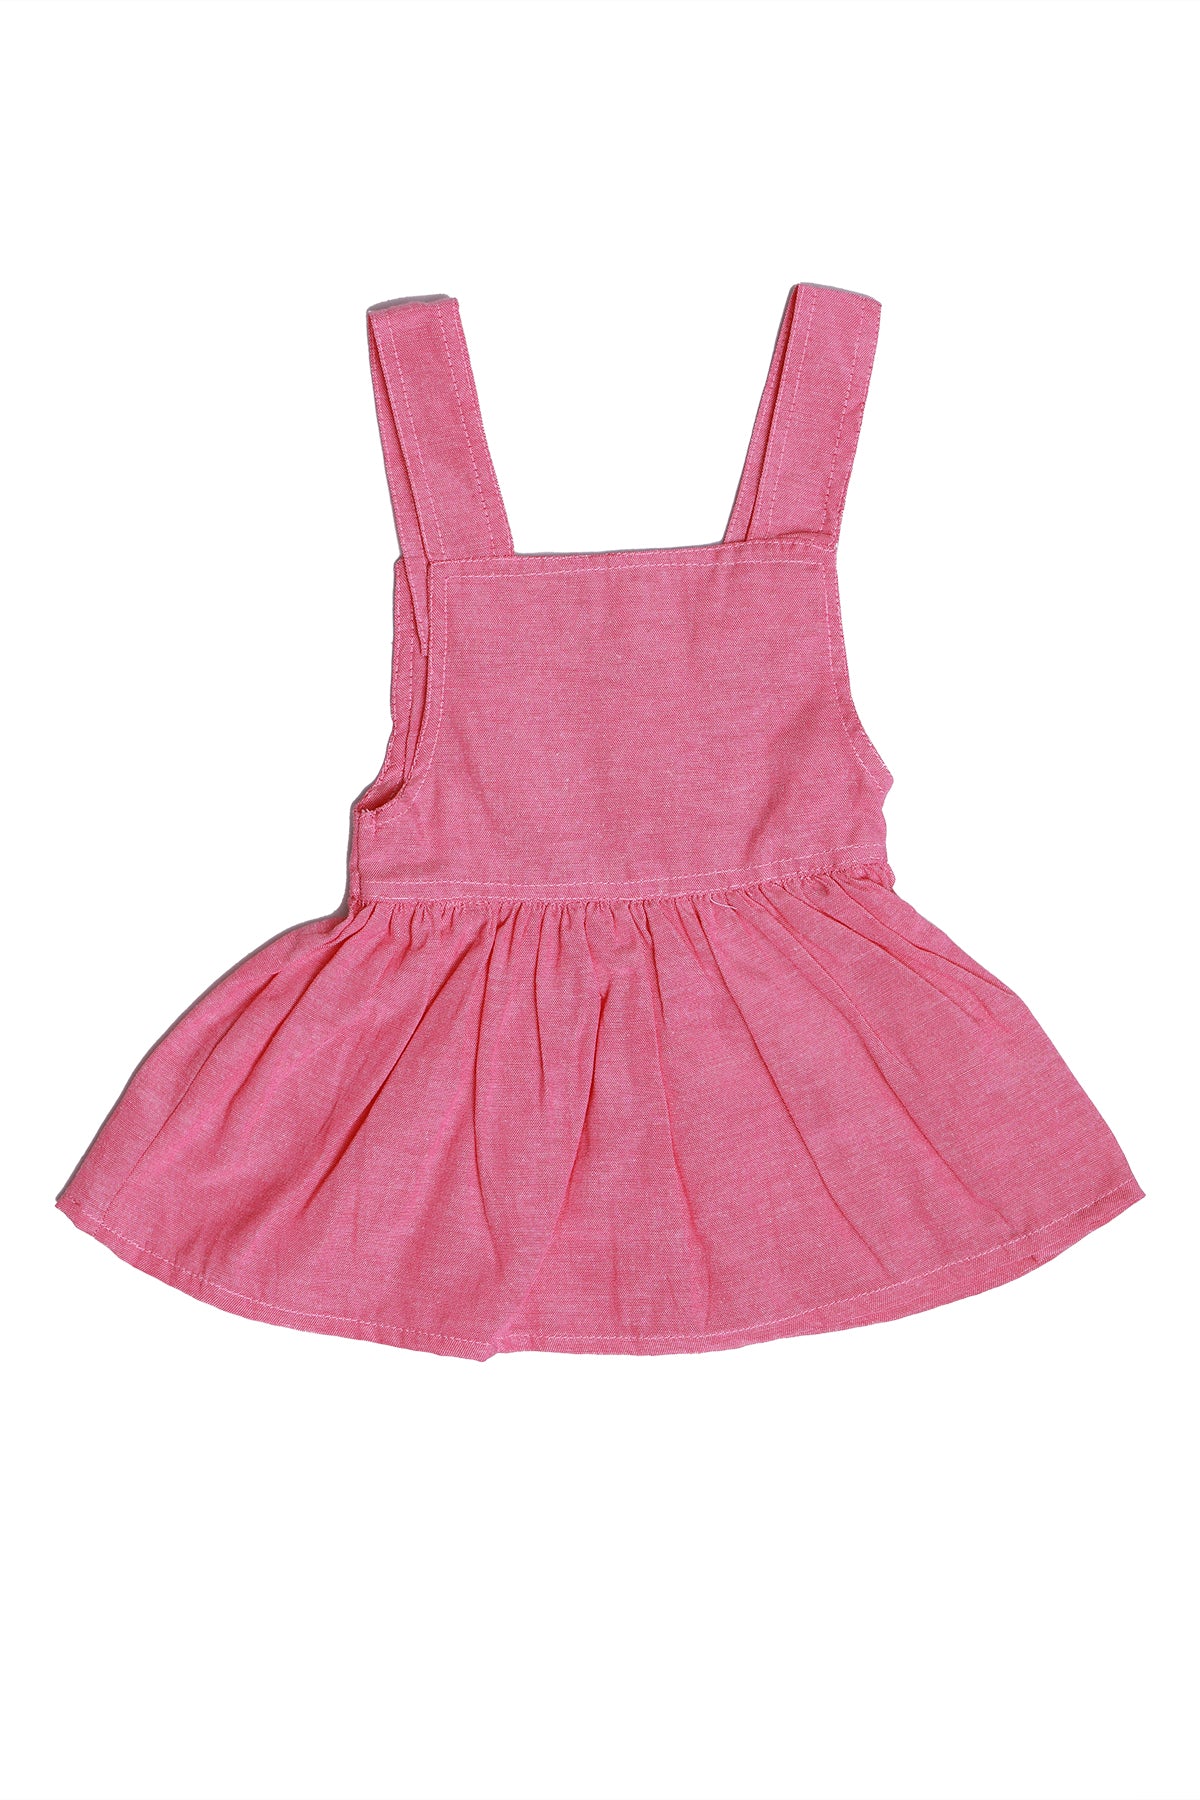 Ozone Baby Girls Casual Pinafore